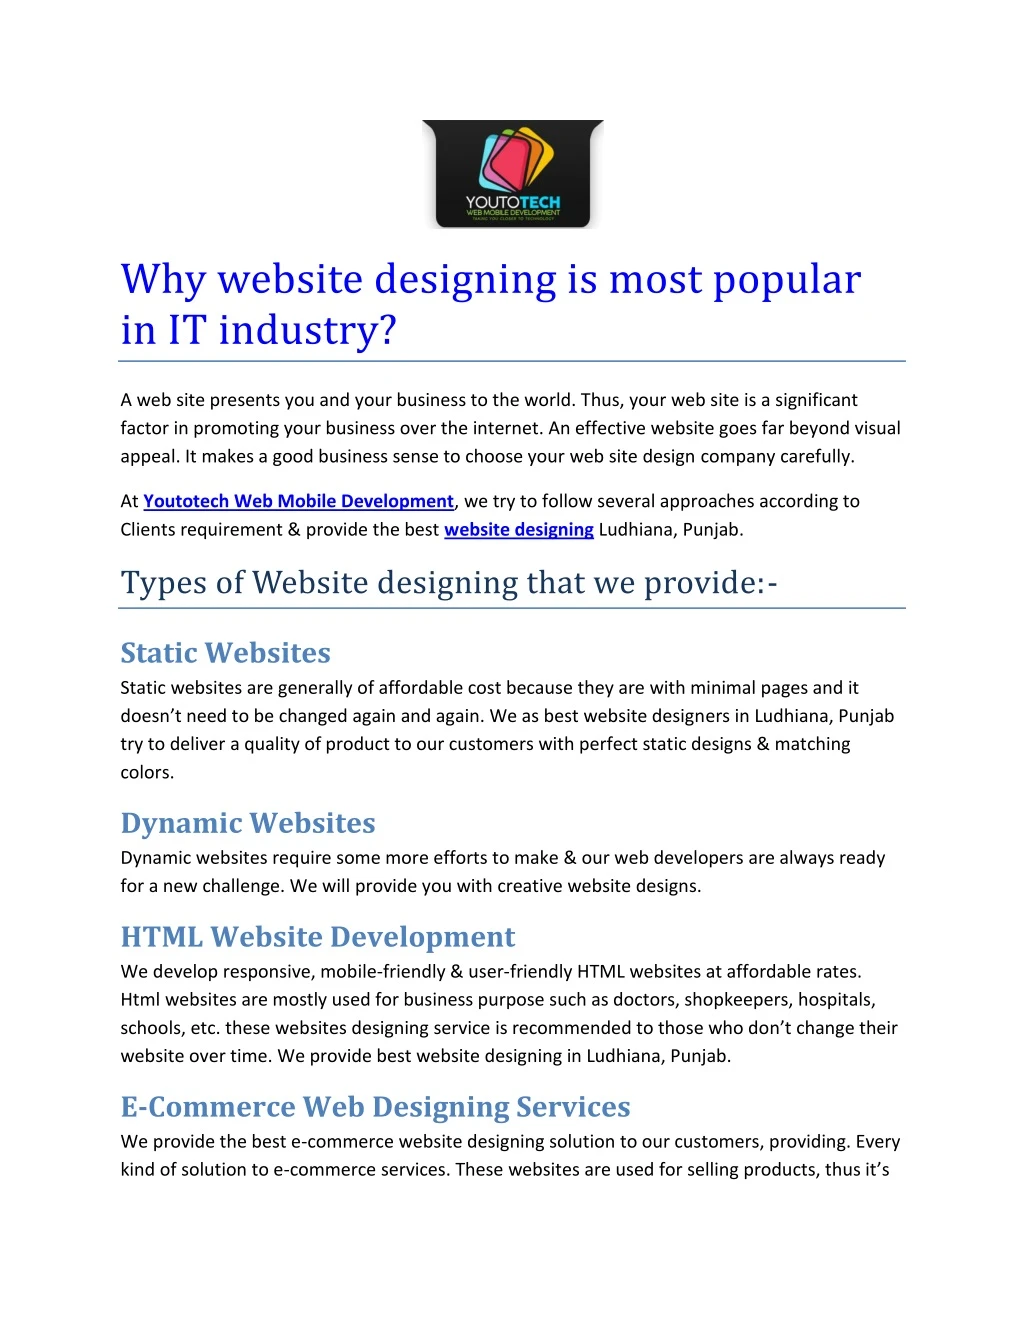 why website designing is most popular